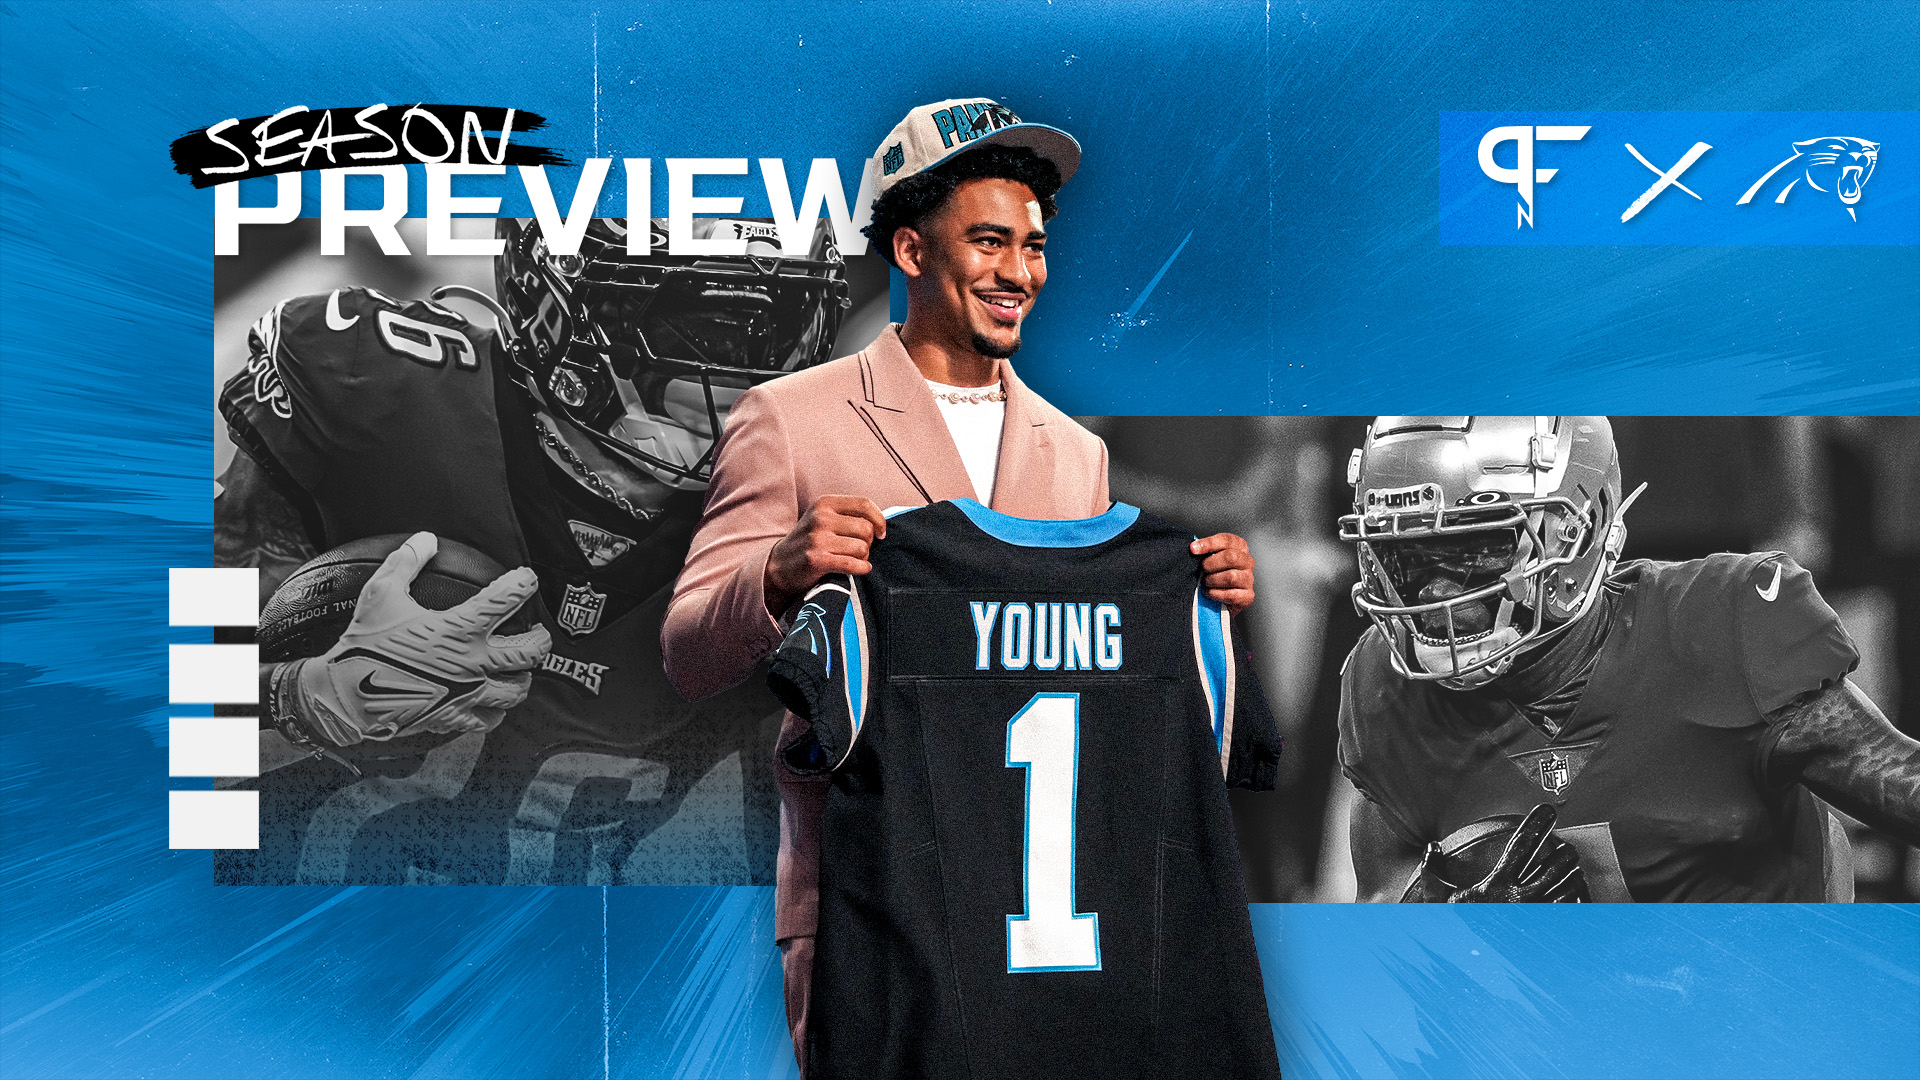 Carolina Panthers Season Preview: Projected Depth Chart, Rosters, and Predictions